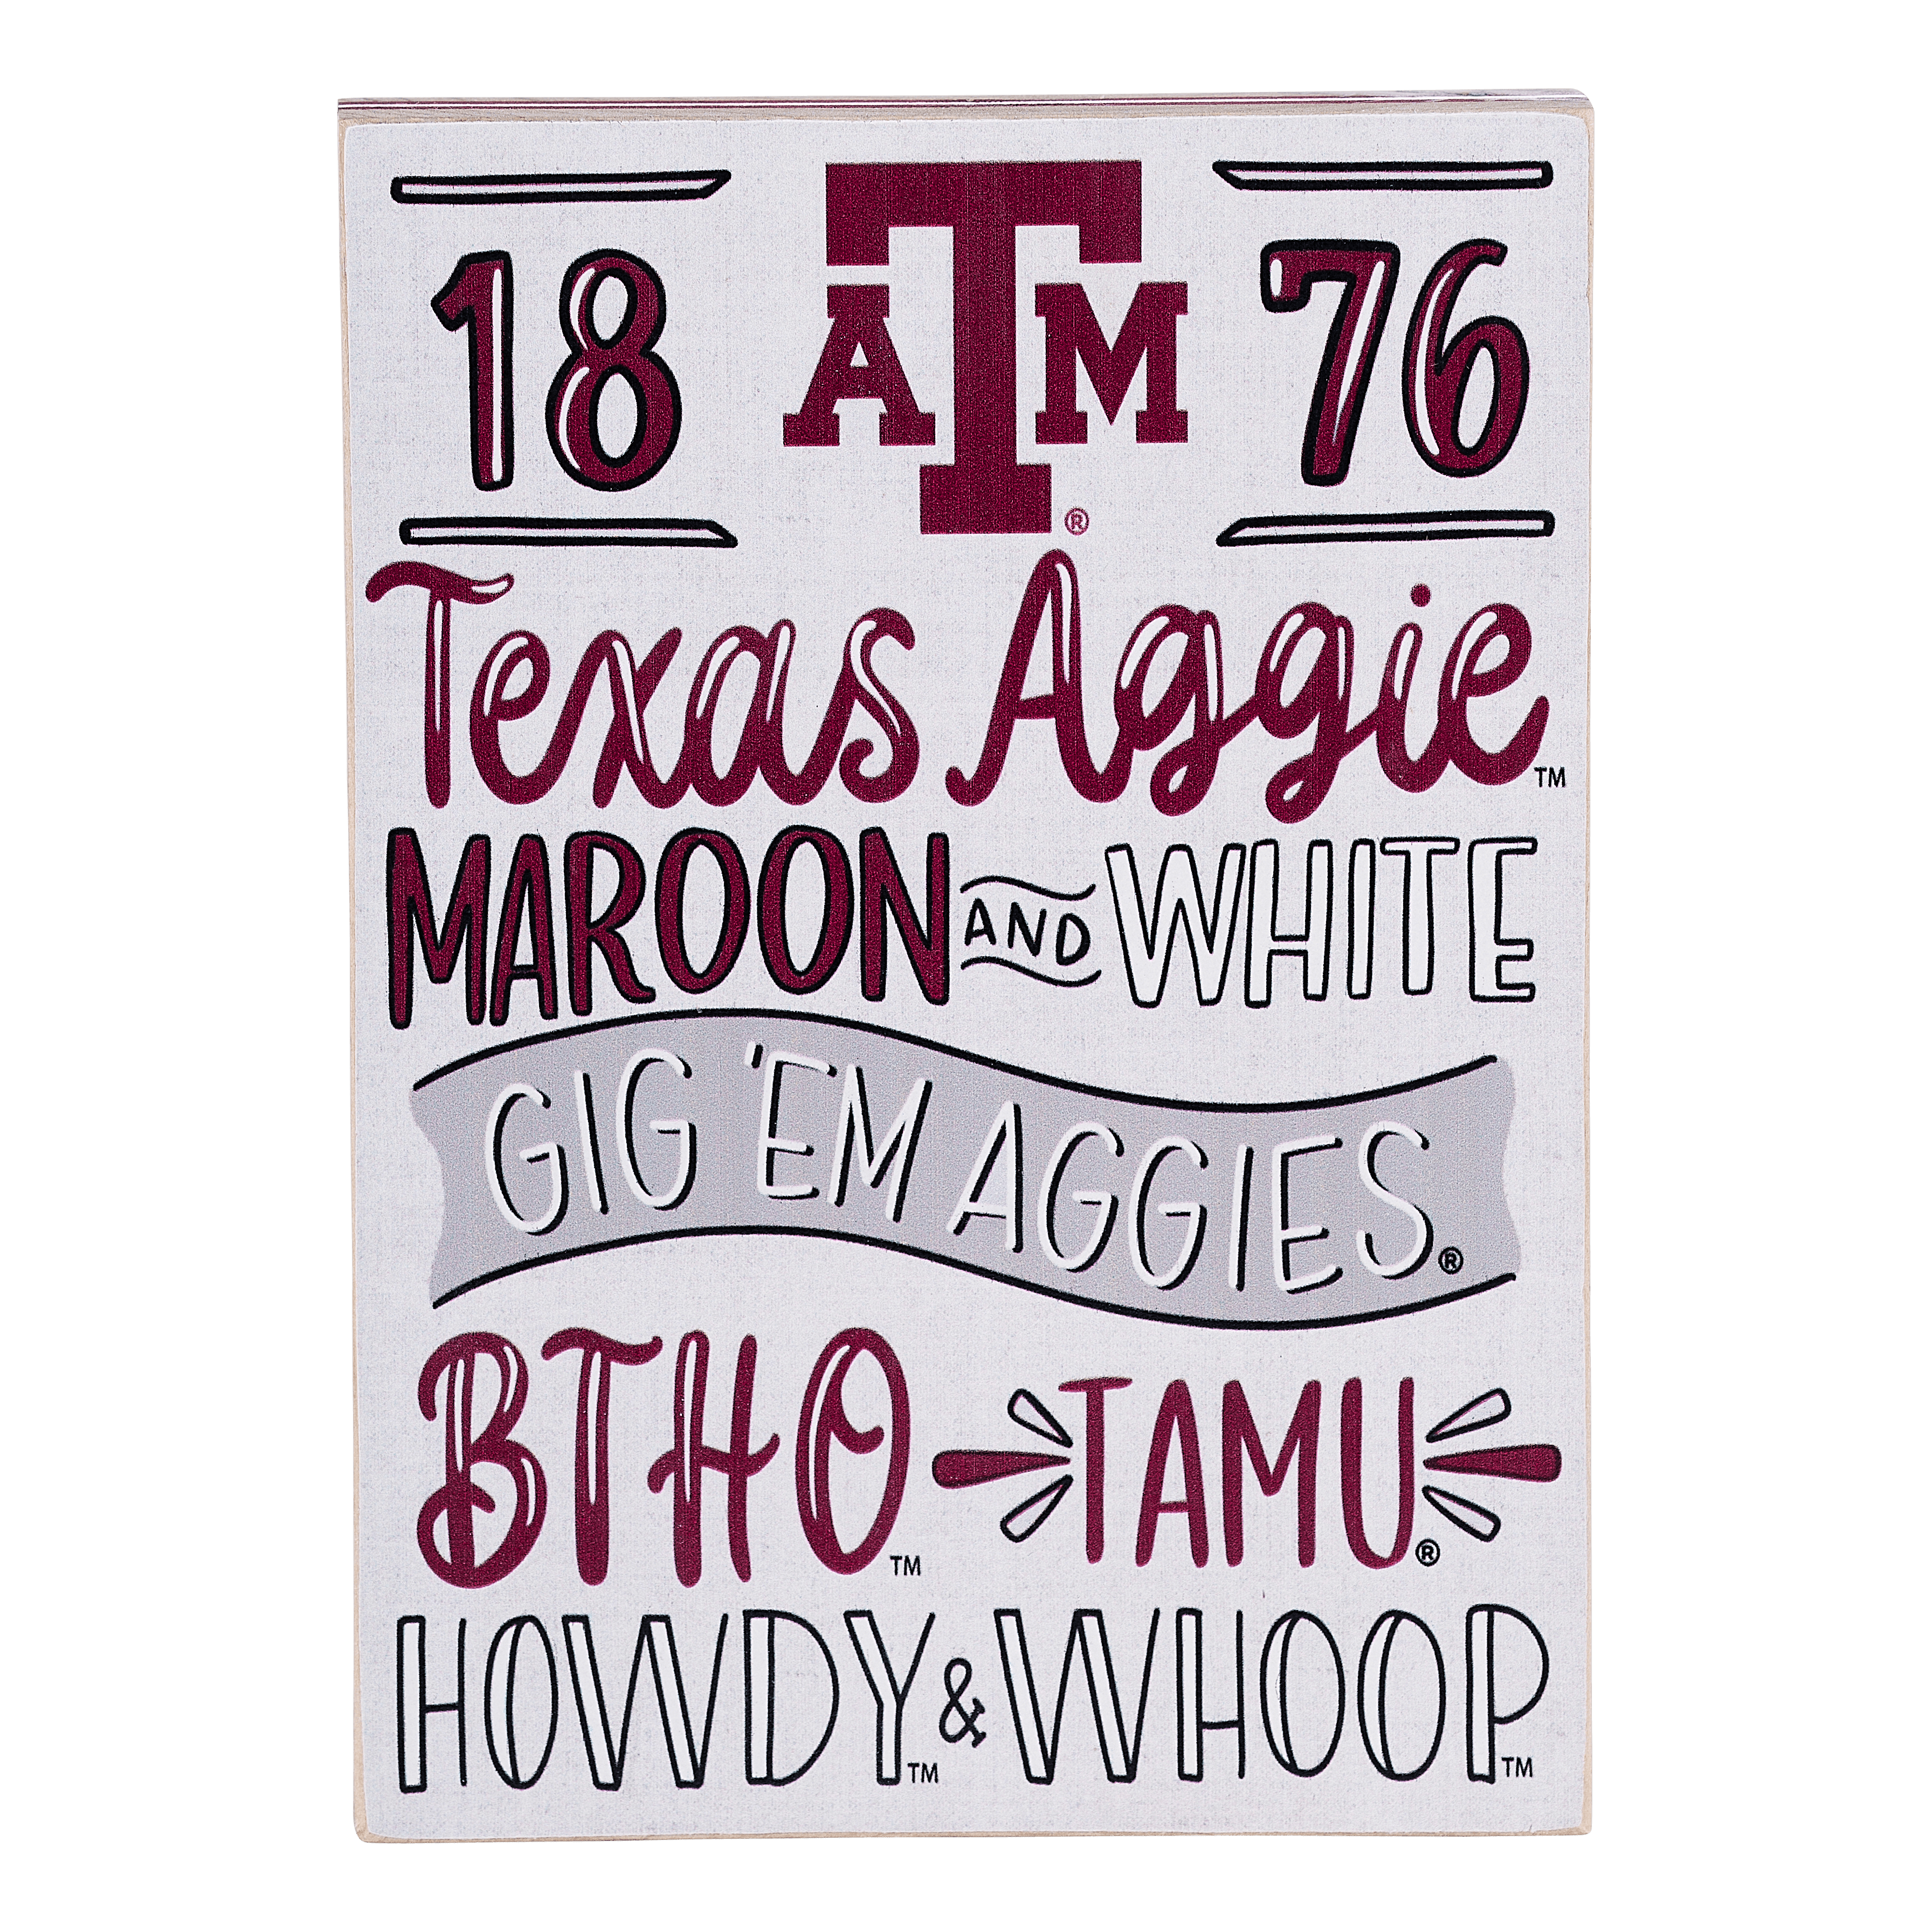 Show Your Aggie Pride with Handcrafted Texas A&M Spirit Gear